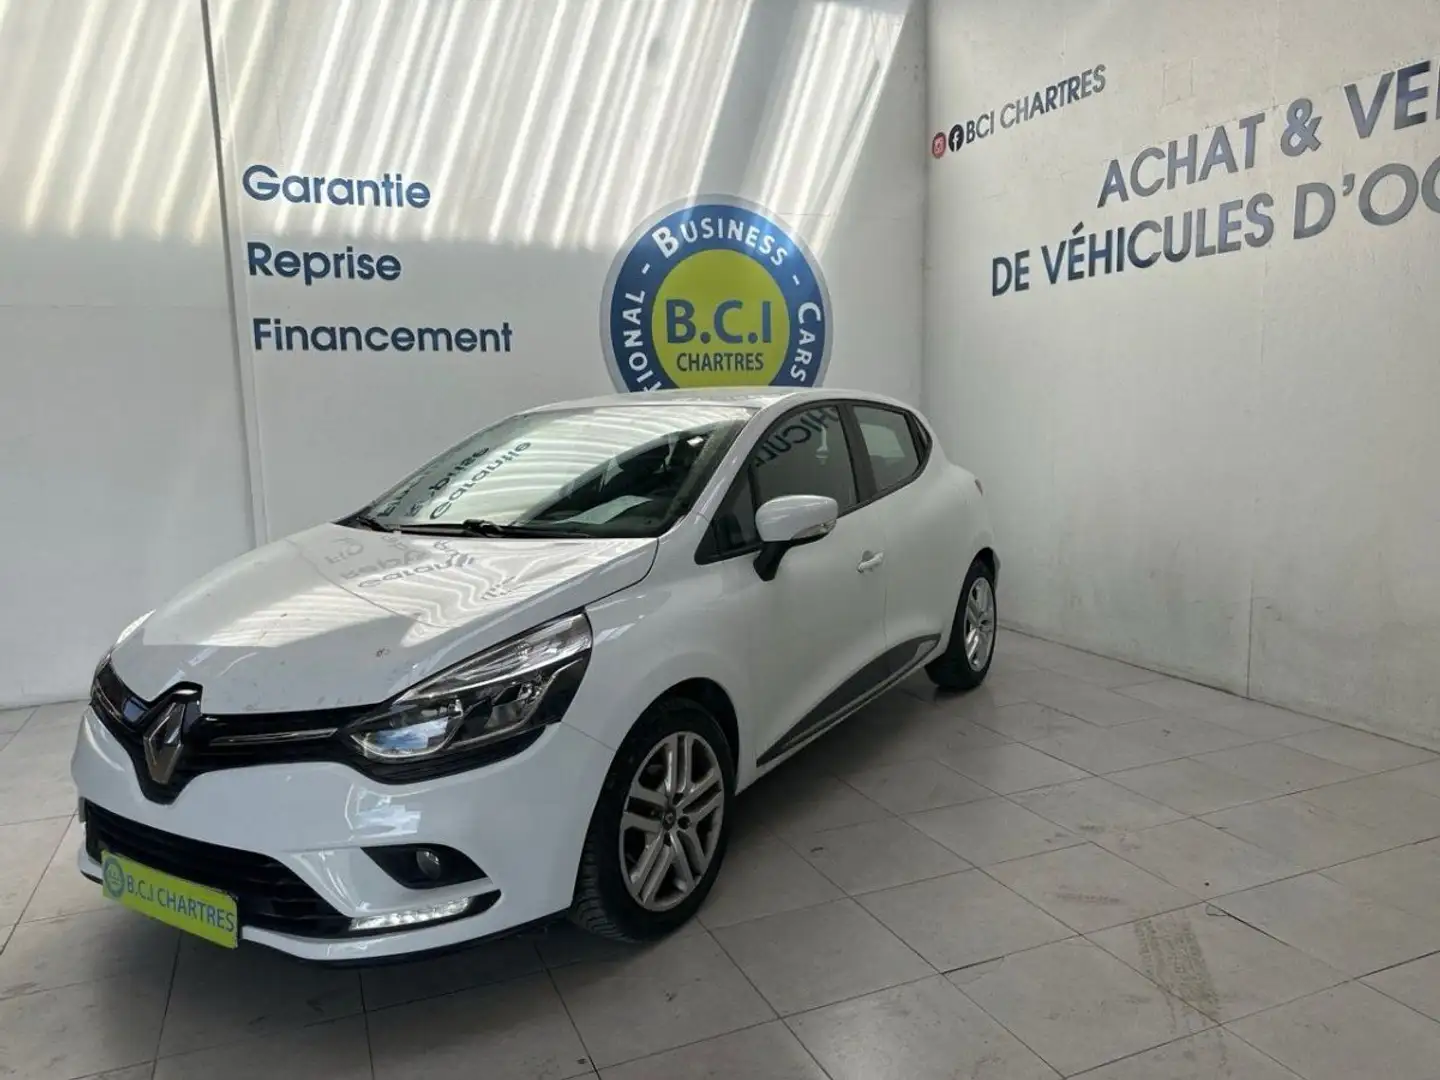 Renault Clio IV 1.5 DCI 75CH ENERGY BUSINESS 5P White - 2